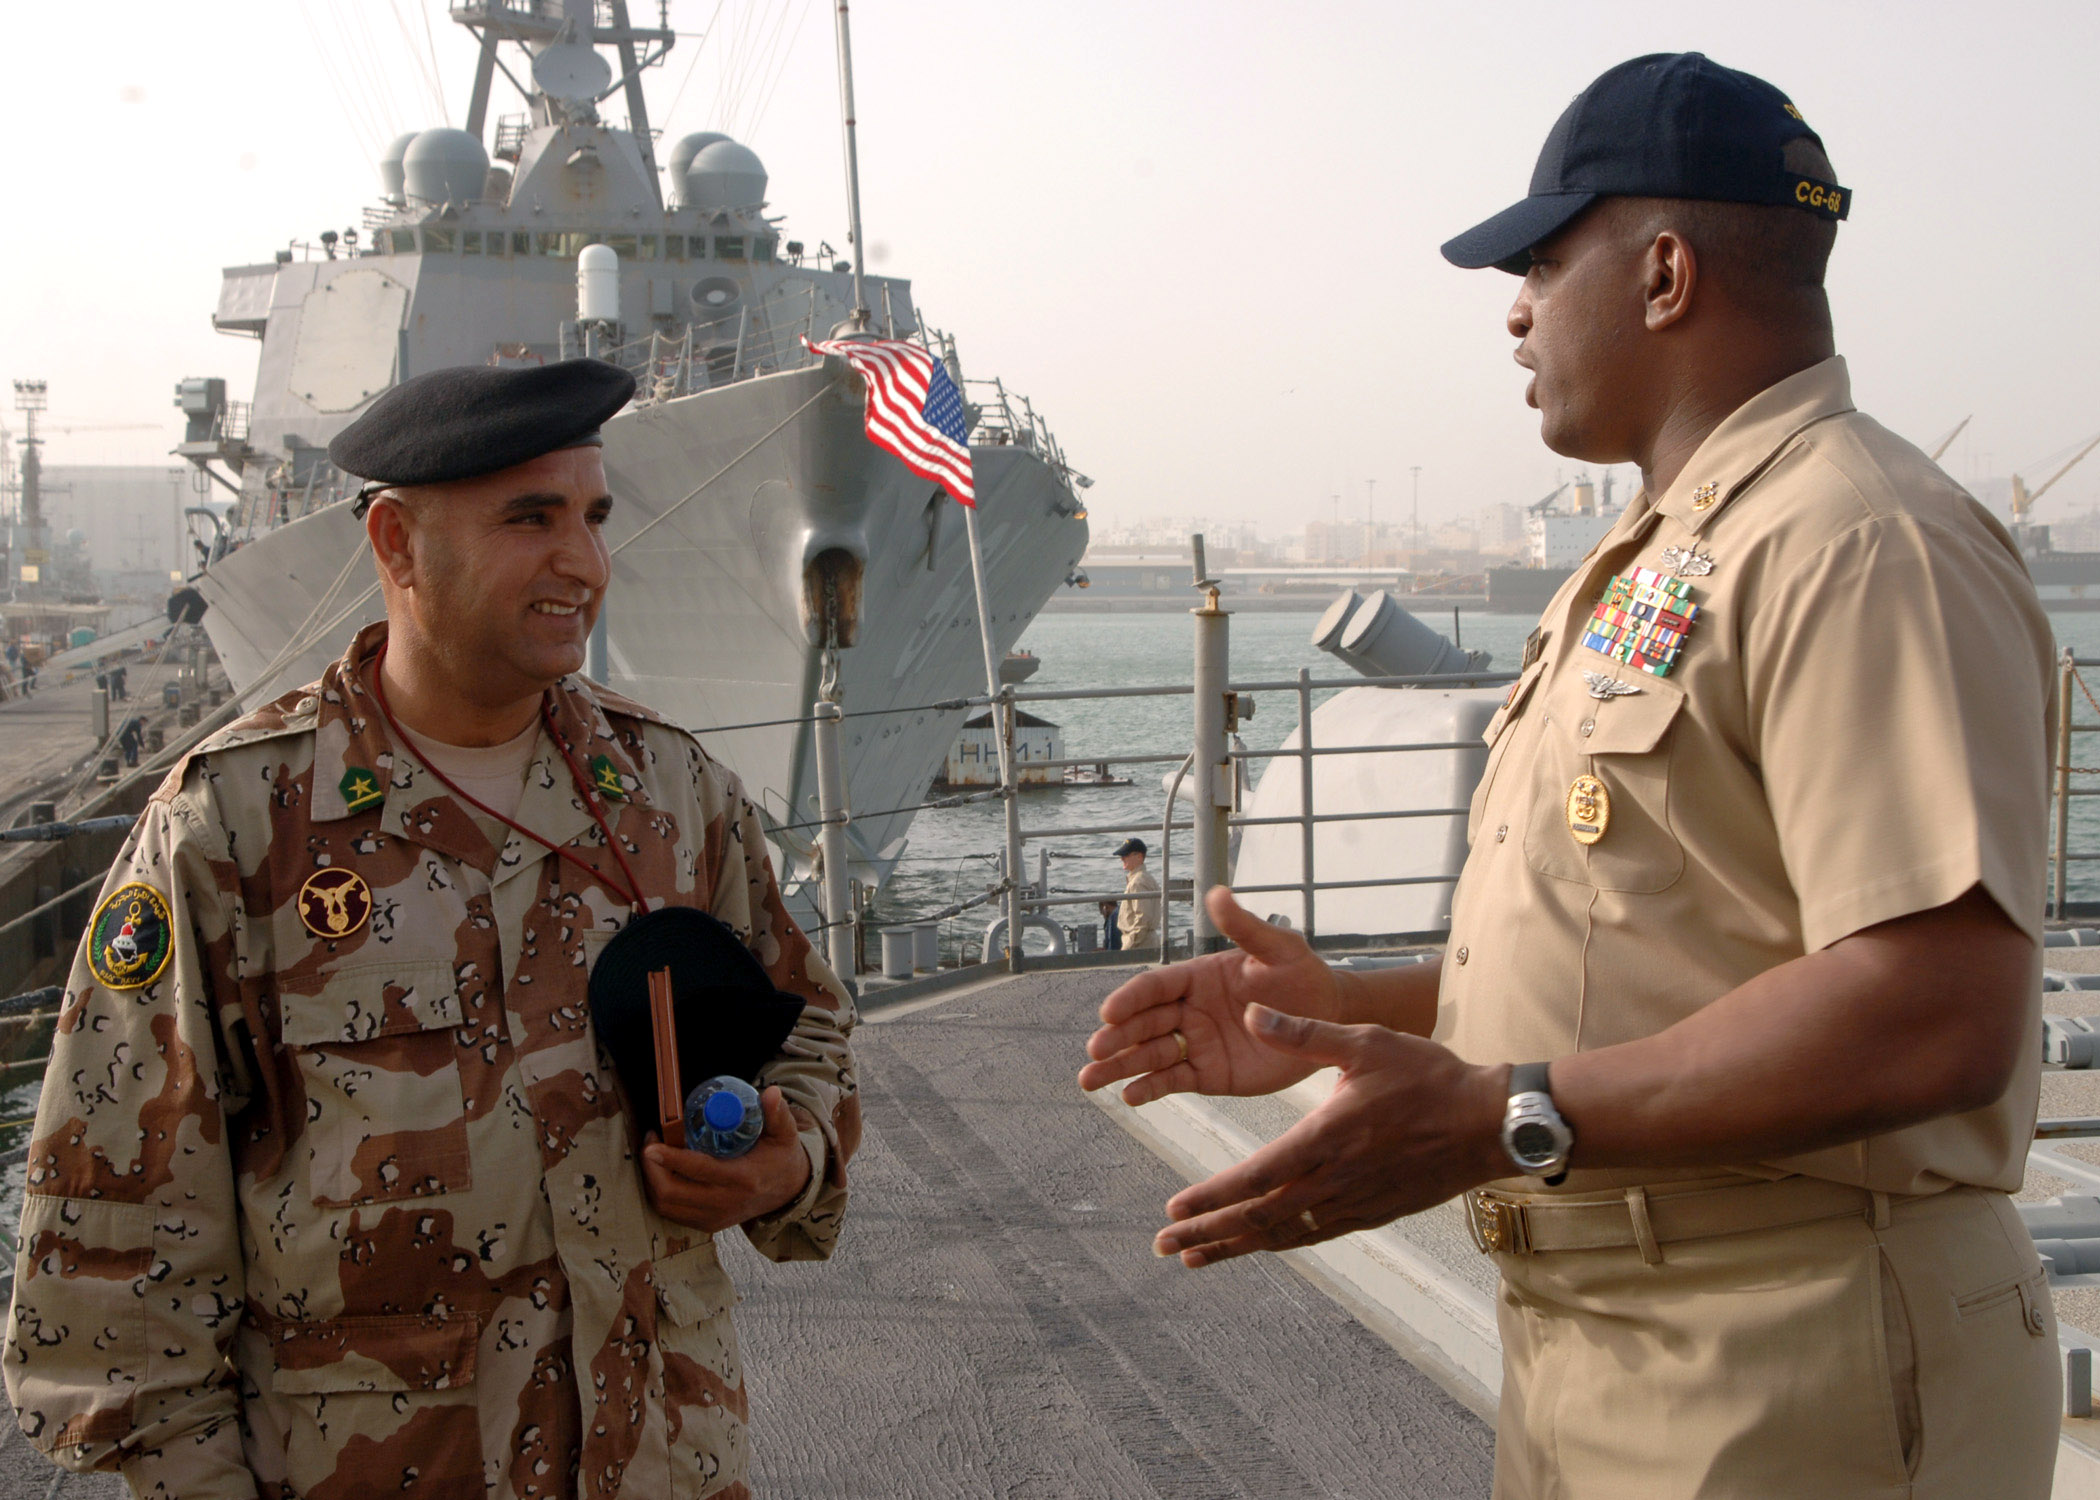 US Navy 070226-N-8560S-005 USS Anzio (CG 68) Command Master Chief William Seegars talks to Iraqi navy Chief Warrant Officer 2nd Class Abdul Majeed during a tour of the ship